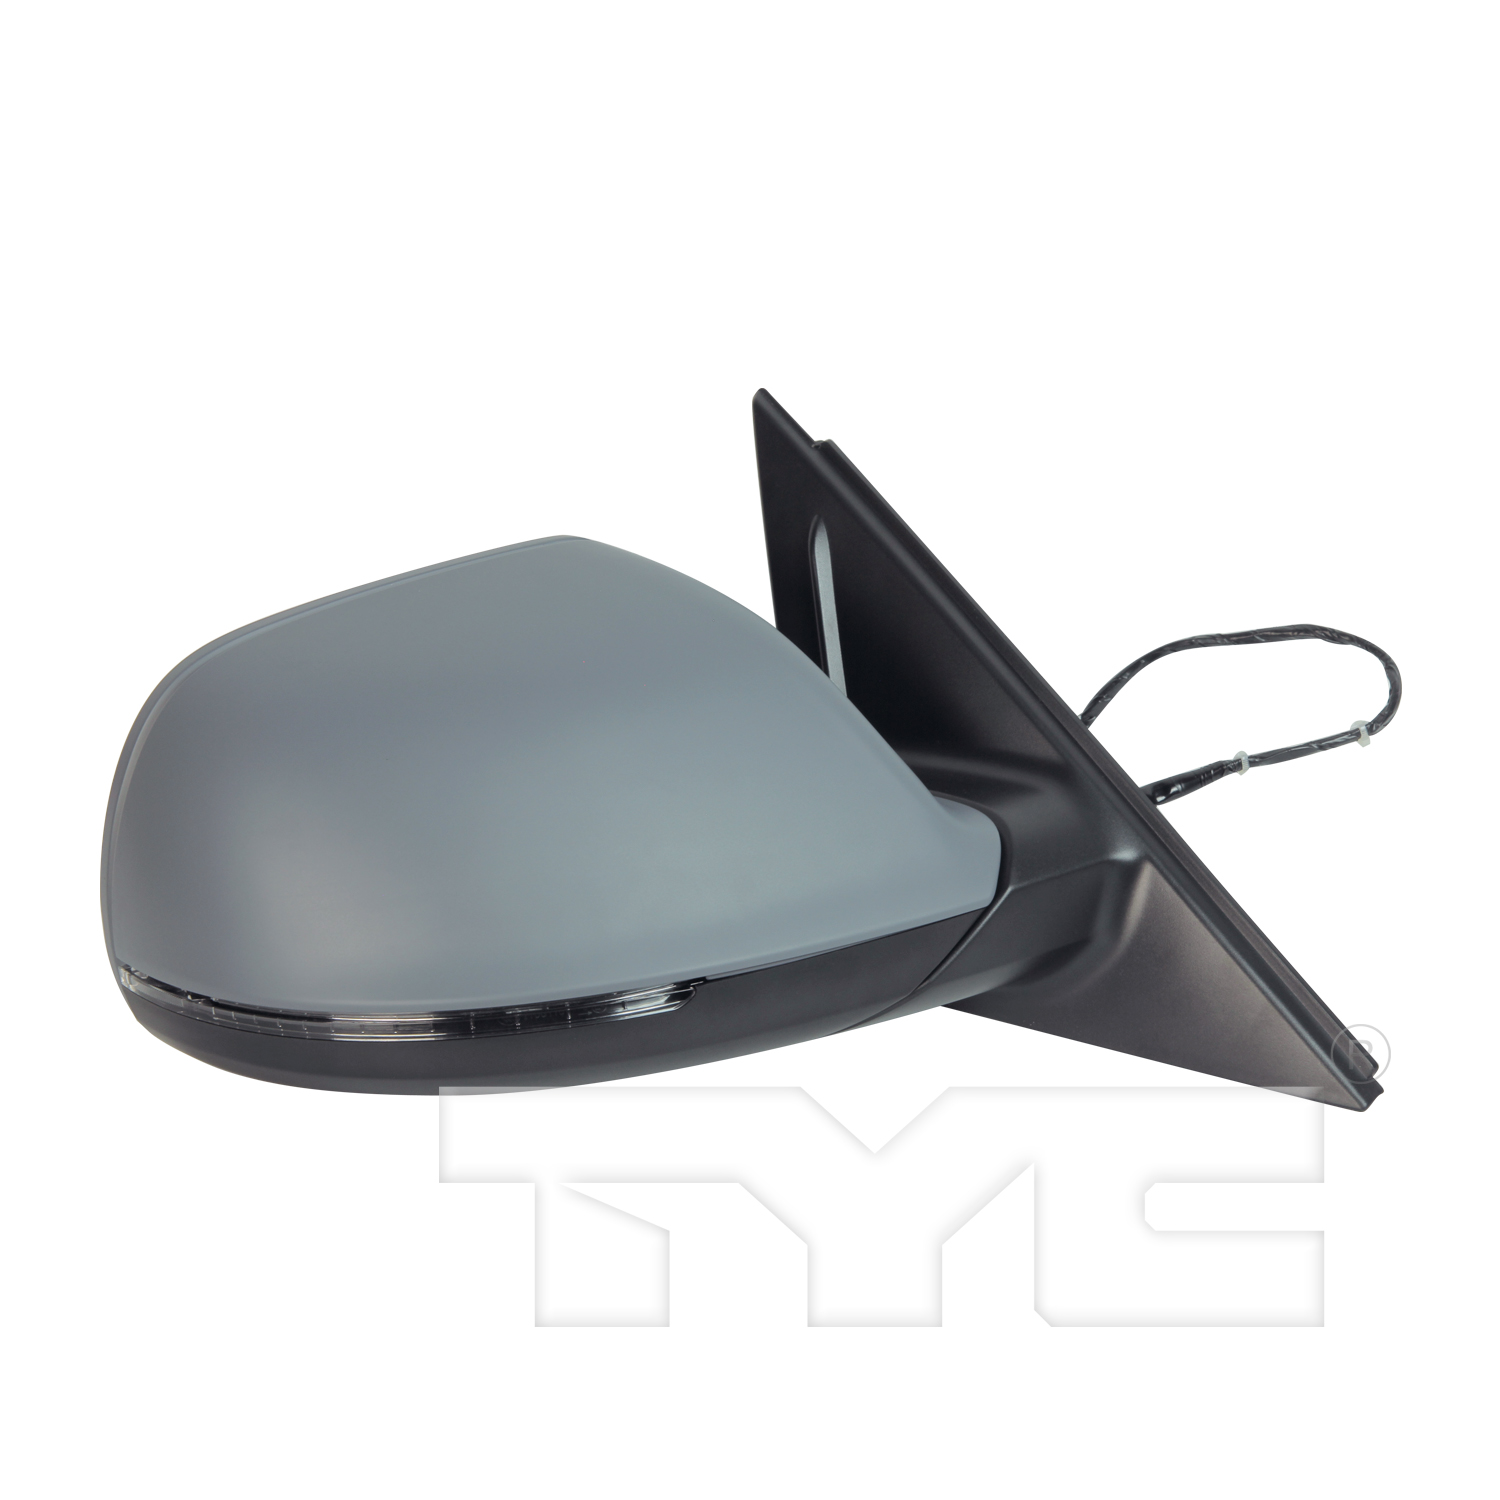 Aftermarket MIRRORS for AUDI - Q5, Q5,09-13,RT Mirror outside rear view